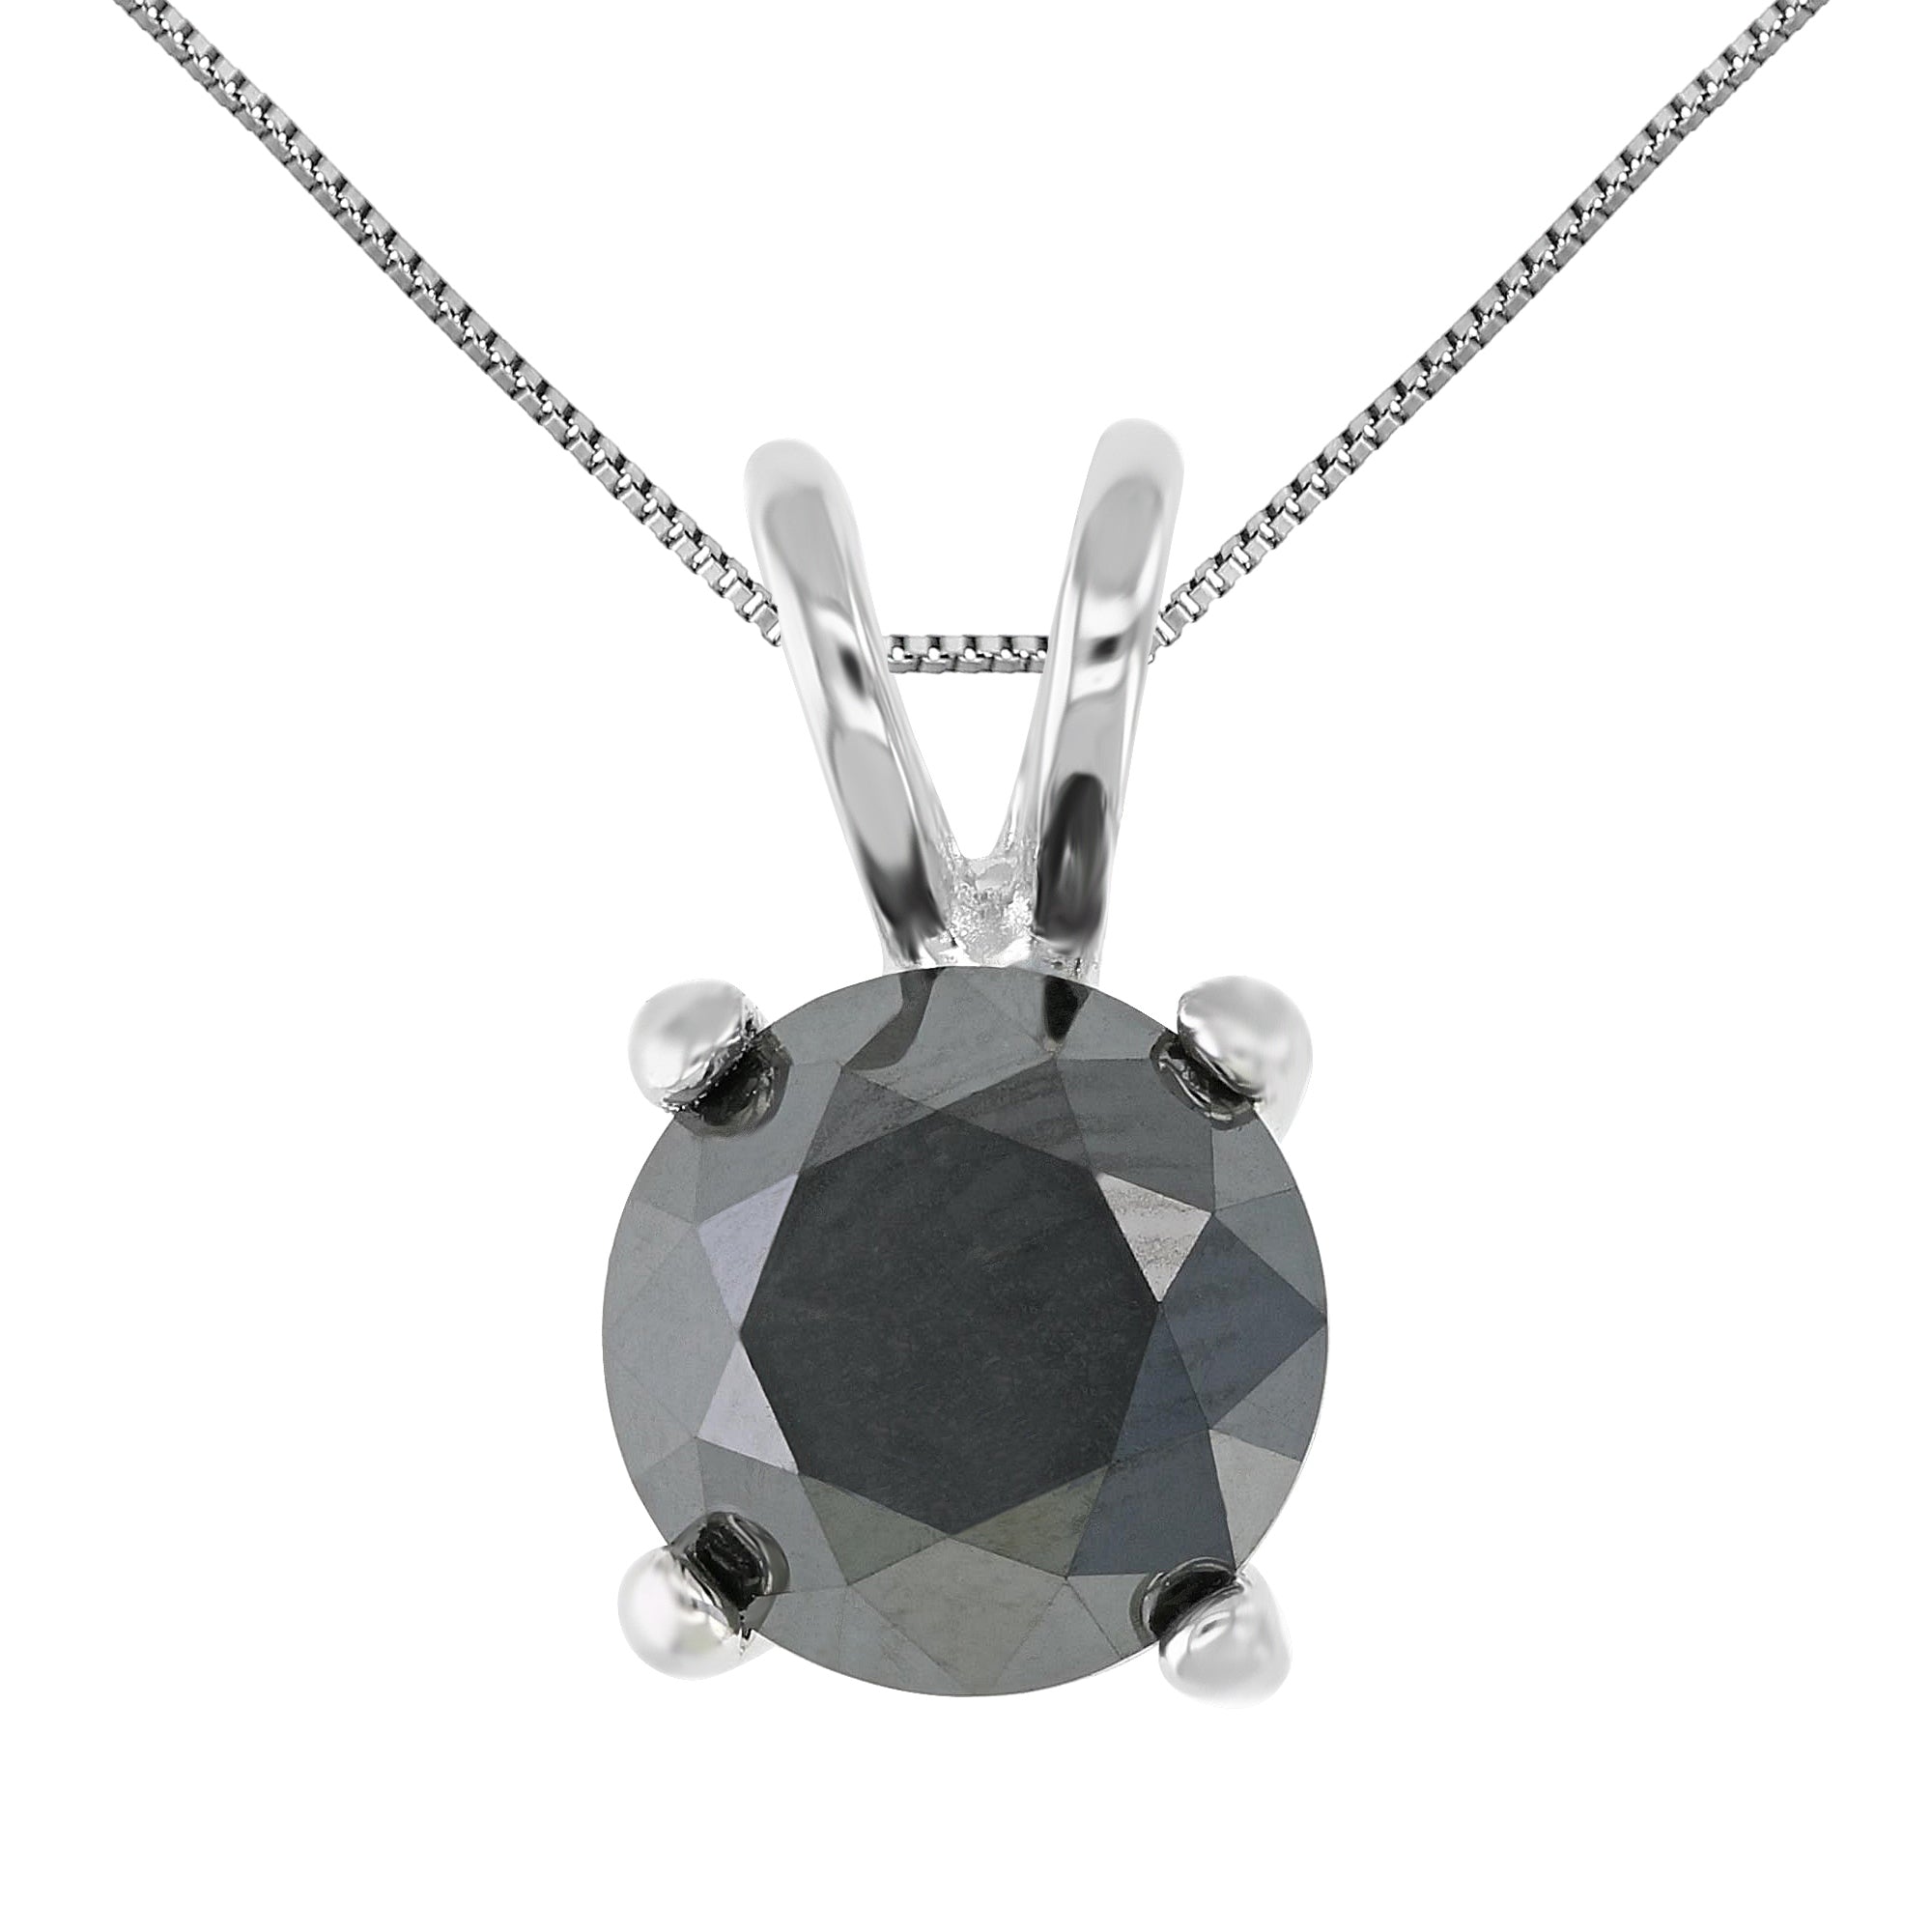 4.50 cttw Diamond Pendant, Black Diamond Solitaire Pendant Necklace for Women in .925 Sterling Silver with Rhodium, 18 Inch Chain, Prong Setting